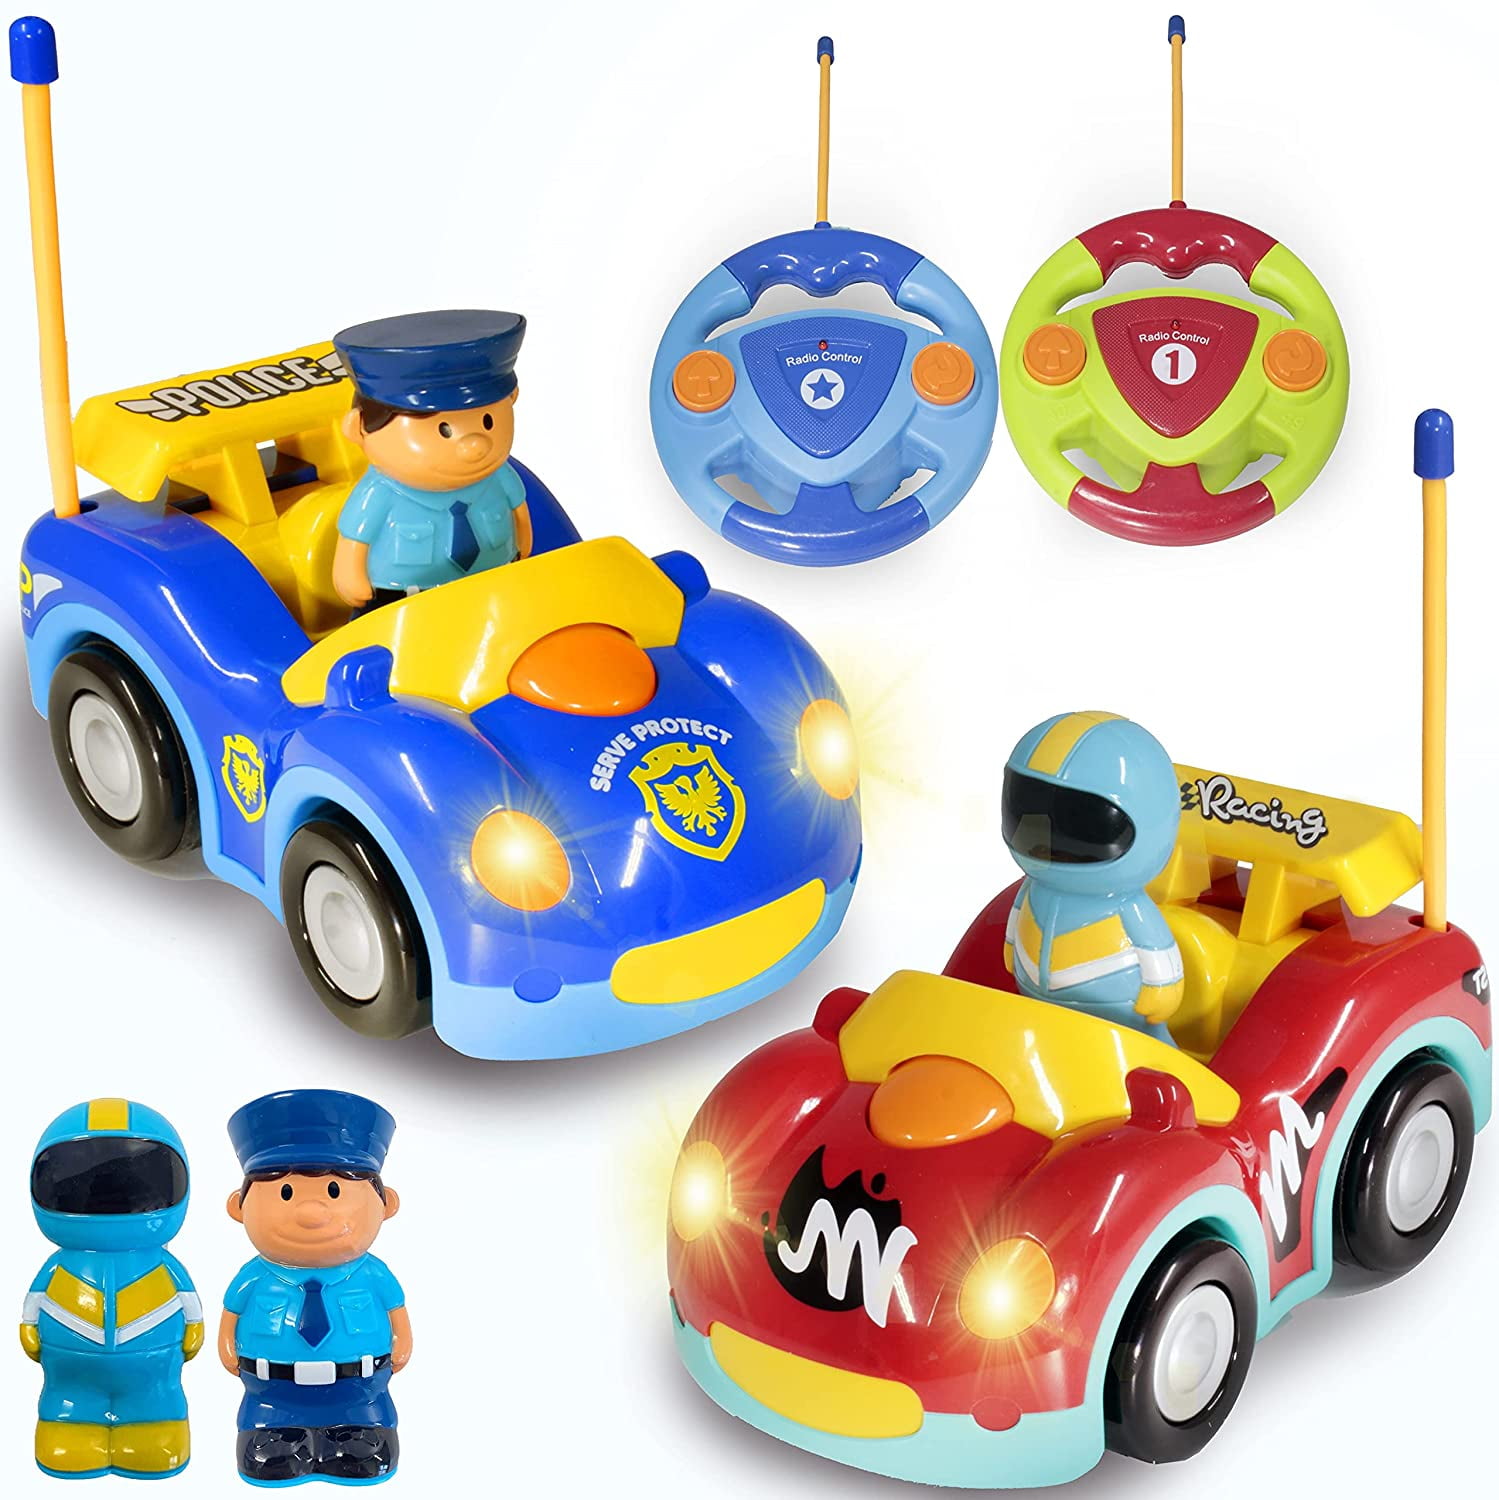 Details about   Cartoon R/C Police Car Race Car Radio Remote Control Kids Toy 2 Pack Toddler New 